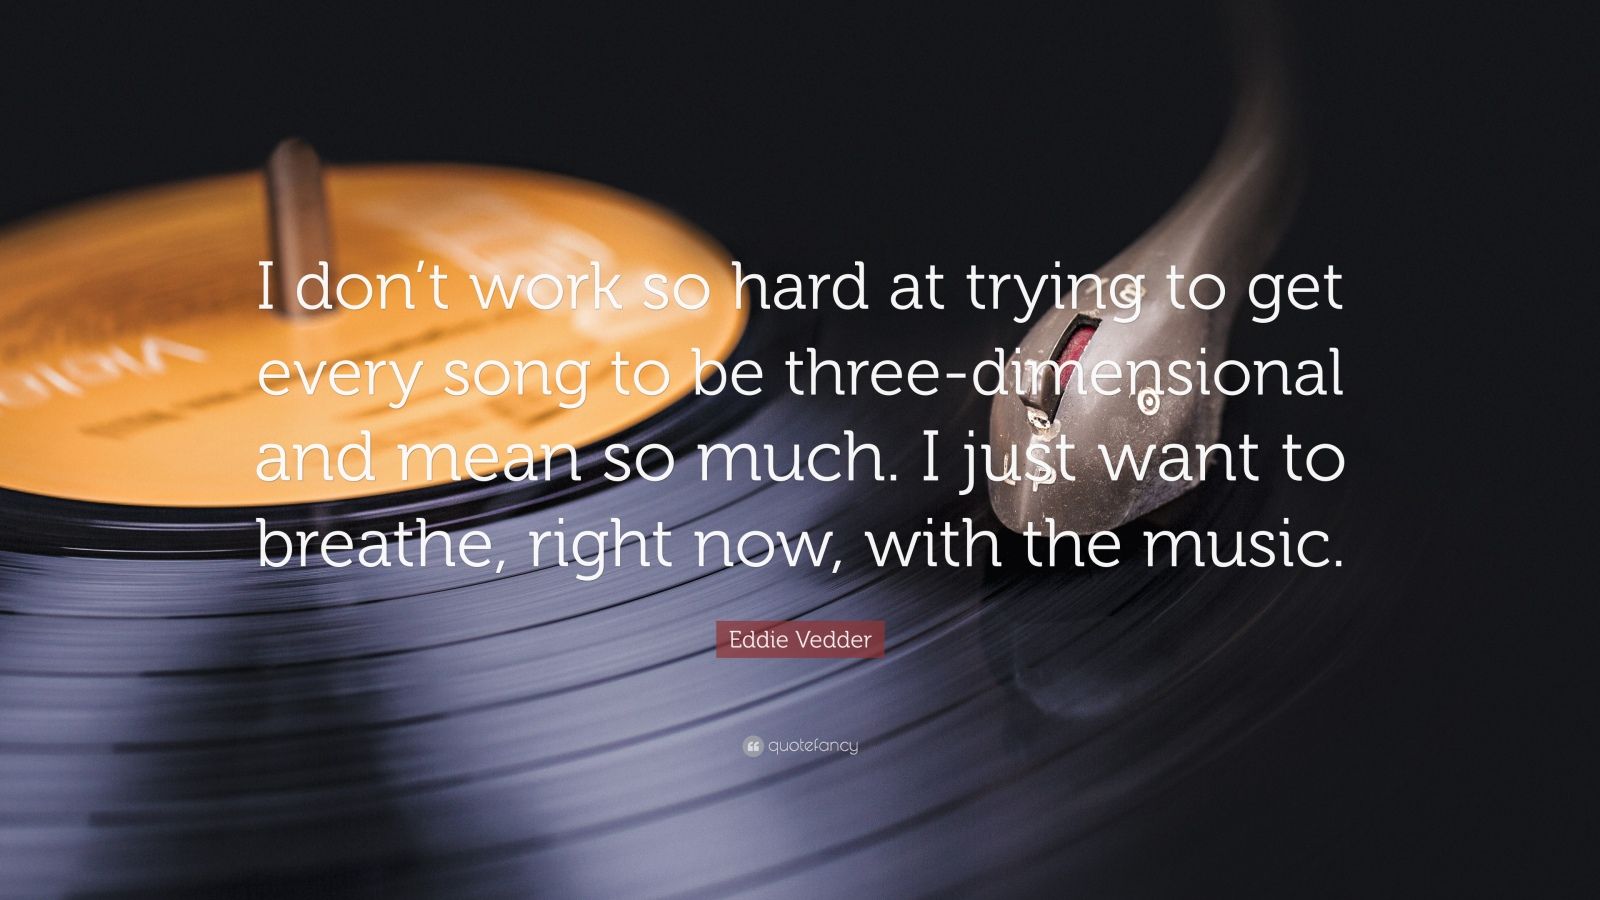 Eddie Vedder Quote: “I don’t work so hard at trying to get every song ...